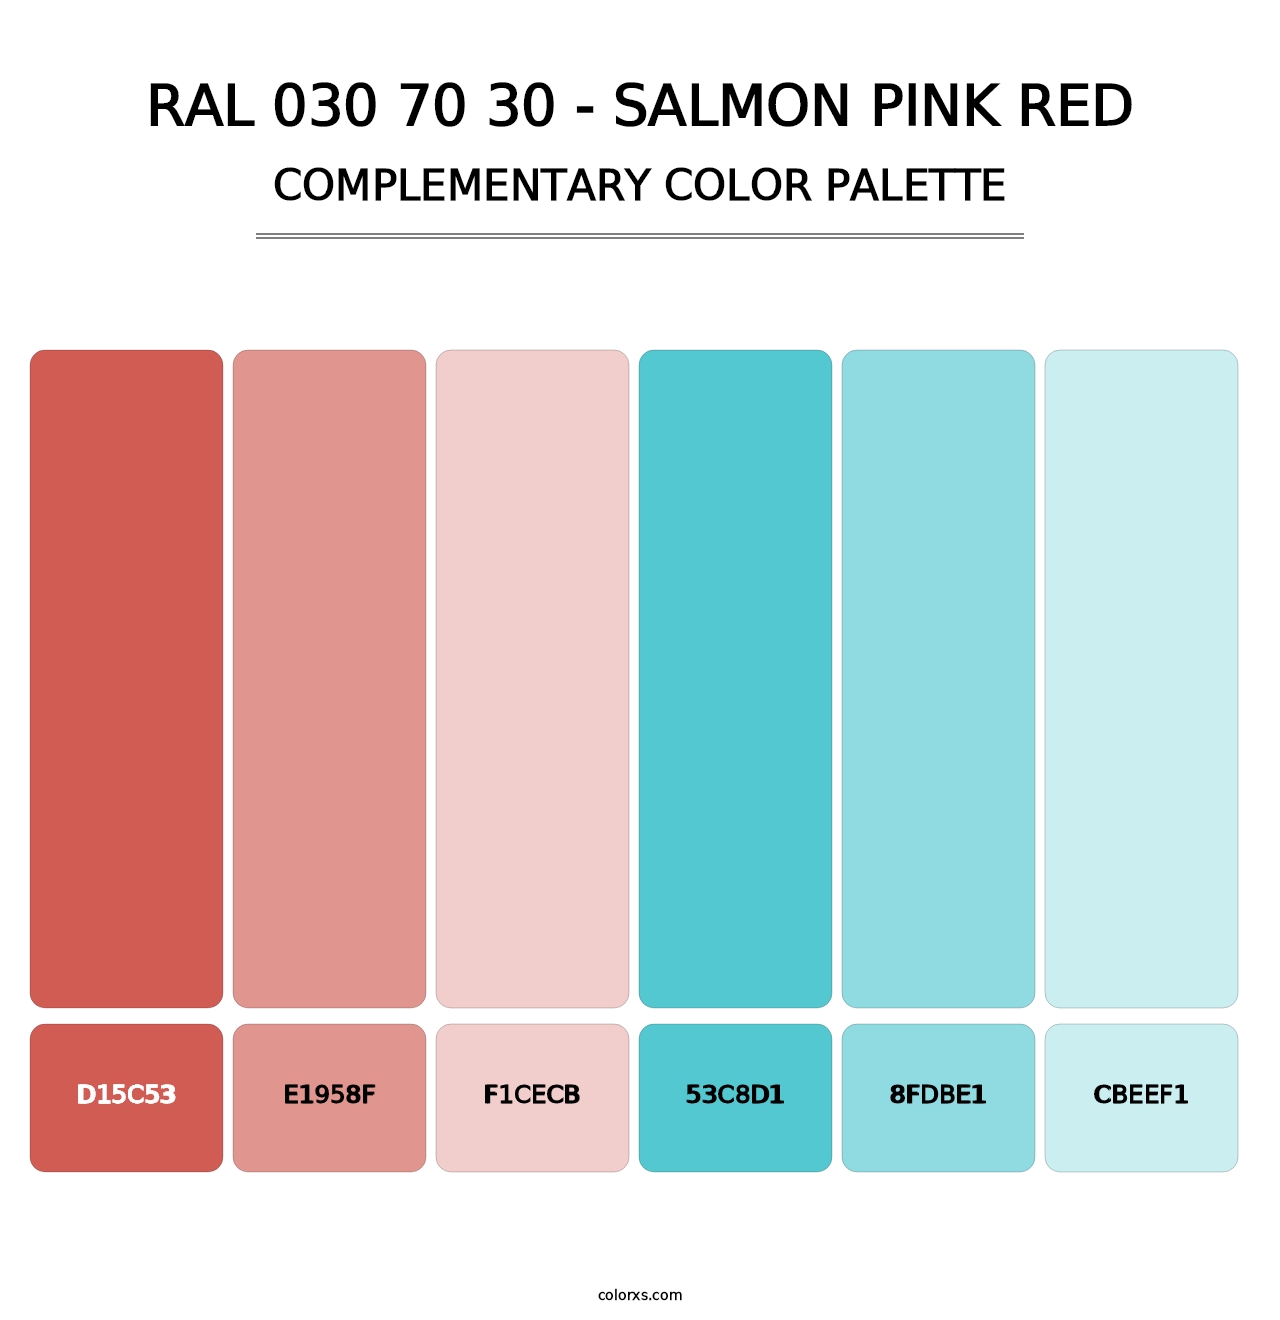 RAL 030 70 30 - Salmon Pink Red - Complementary Color Palette